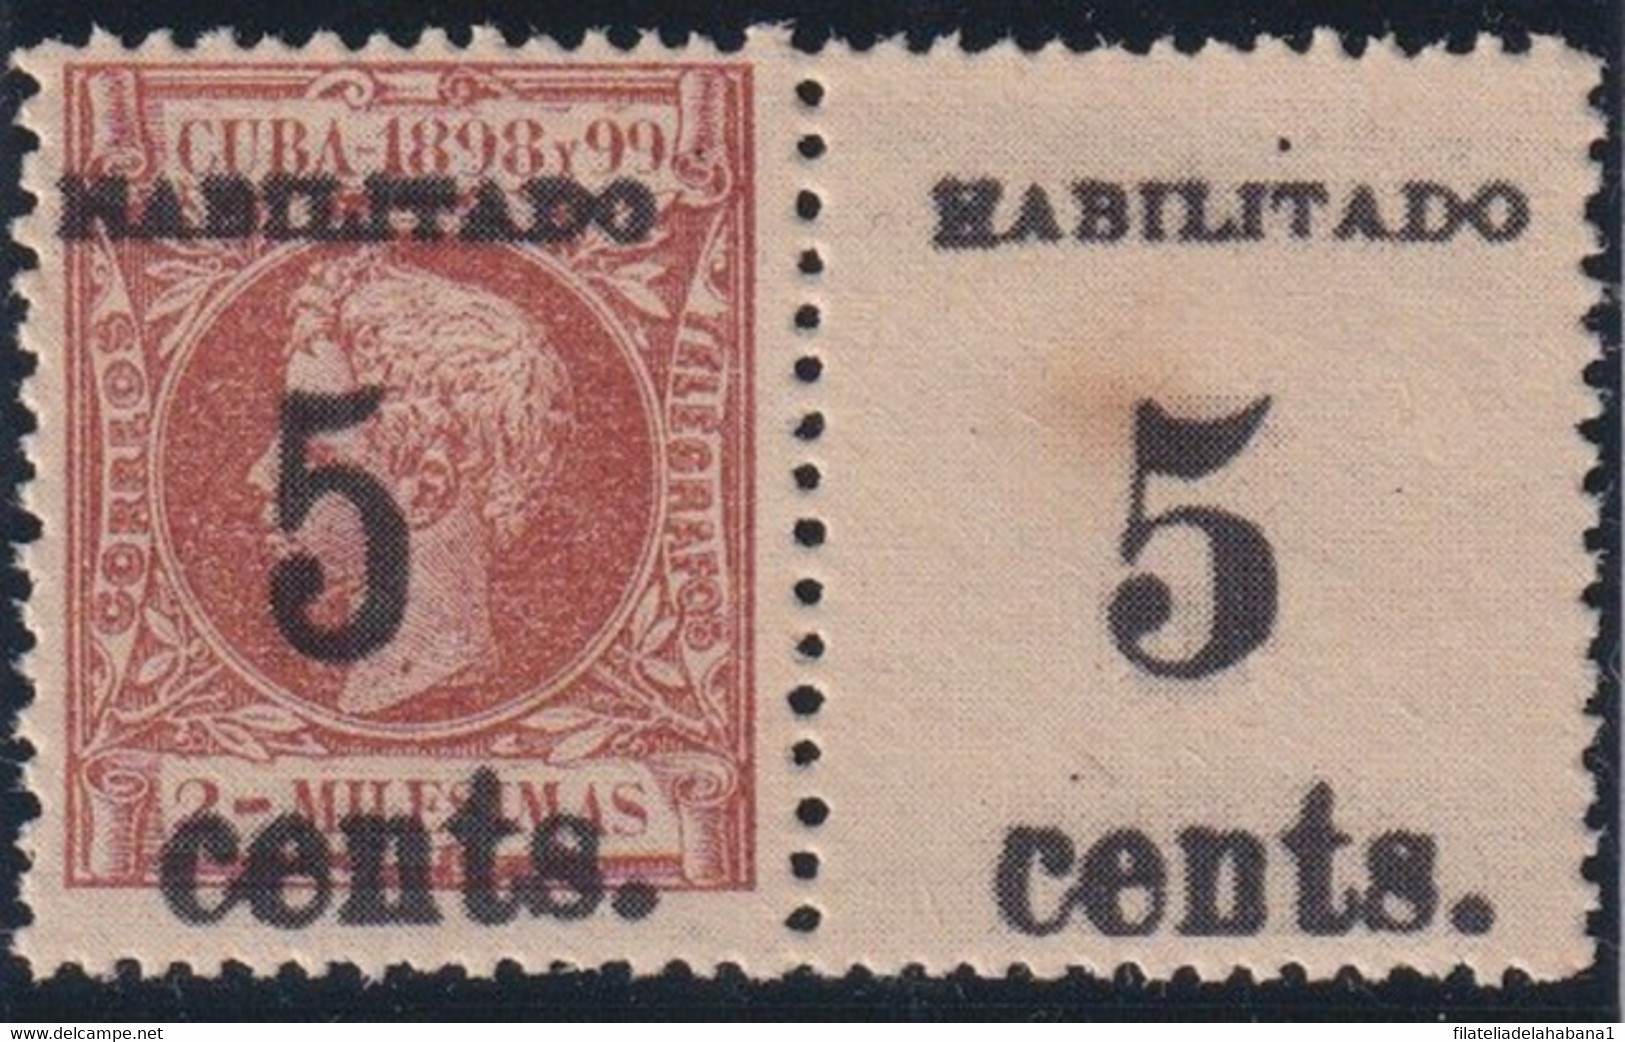 1899-608 CUBA 1899 US OCCUPATION. FORGERY PUERTO PRINCIPE. 2º ISSUE. 5c S. 5 Mls. PAIR NORMAL + SMALL NUMBER. - Nuovi